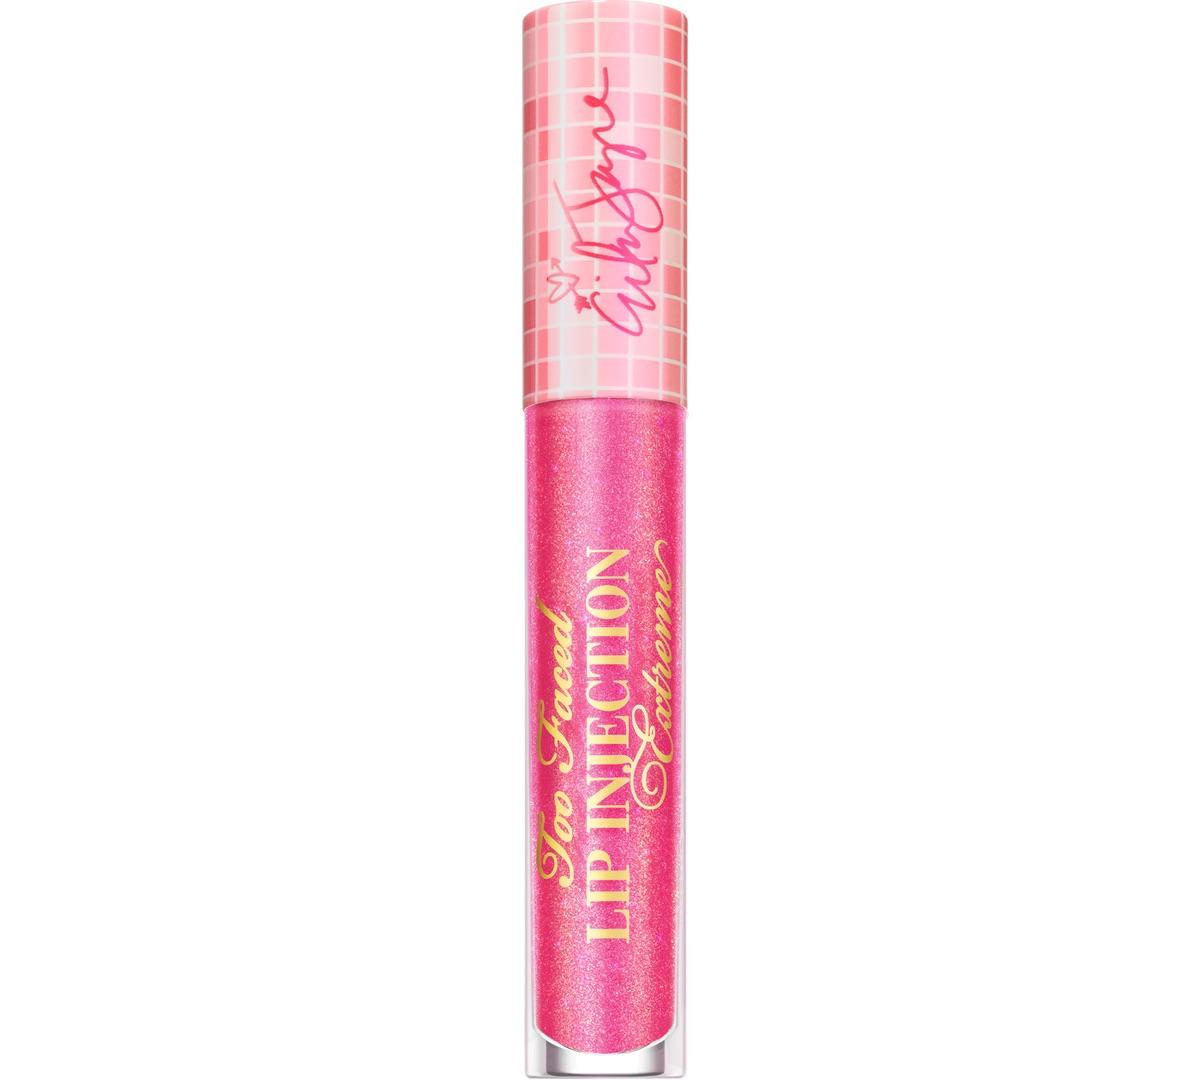 Too Faced Lip Injection Extreme Painkillr Pink